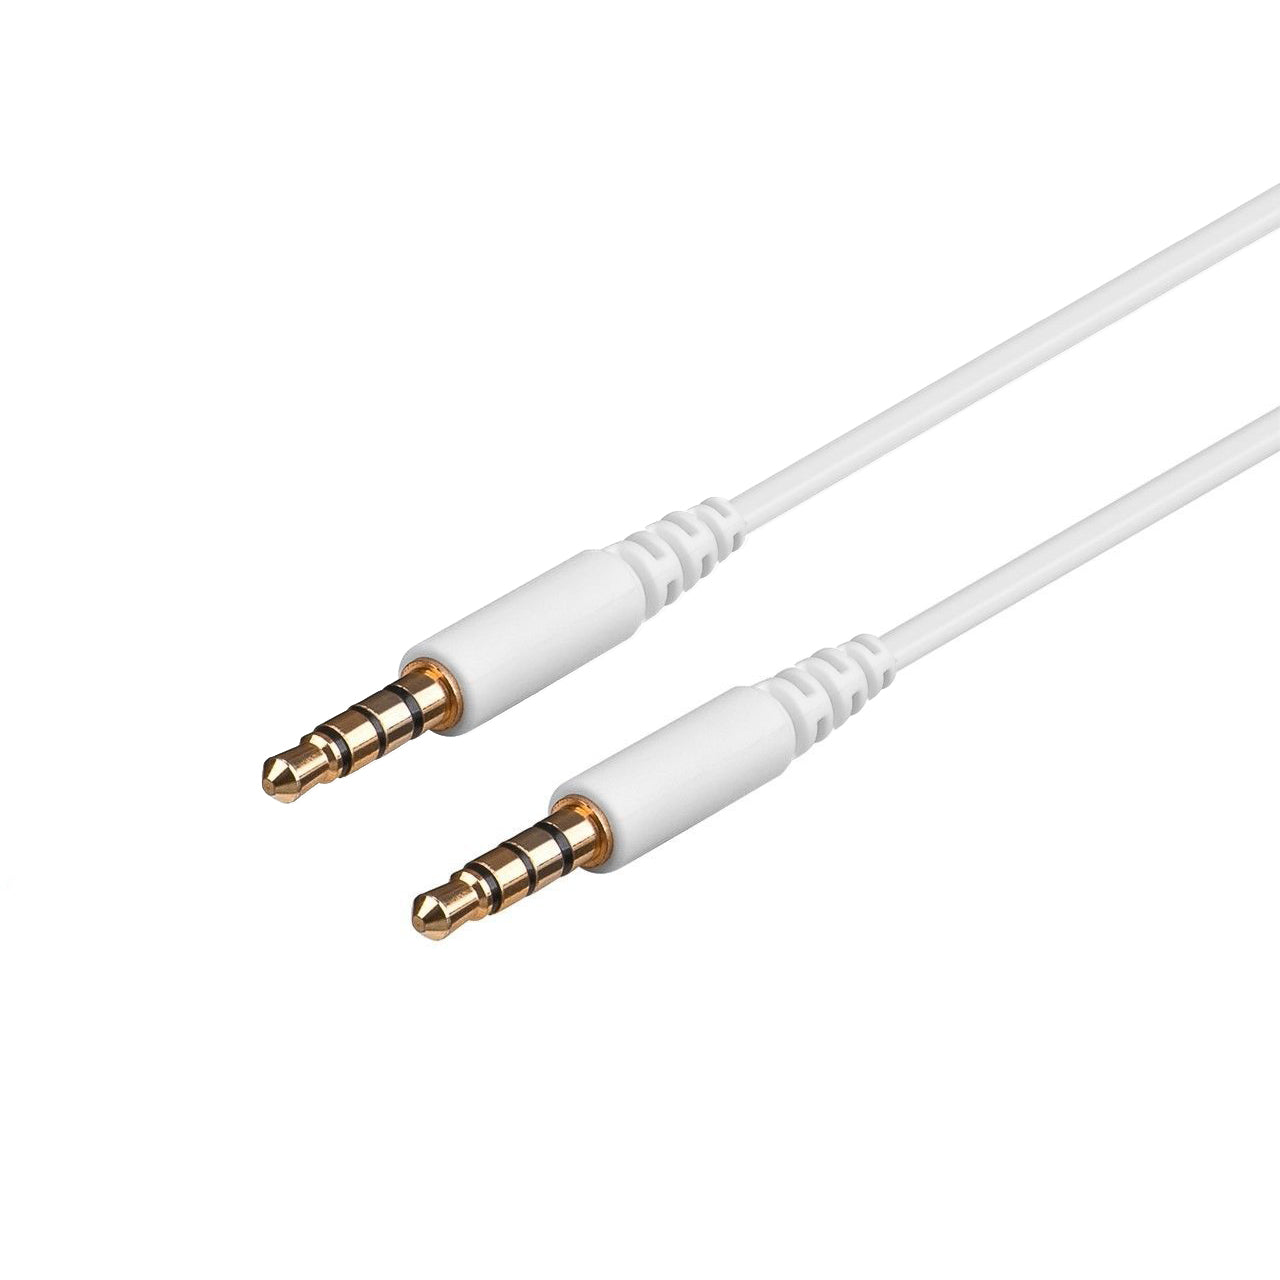 ISNATCH Audio Cable with Gold 3.5mm Jack Plug, Stereo AUX Cable, 1.2m Durable Stereo Cable